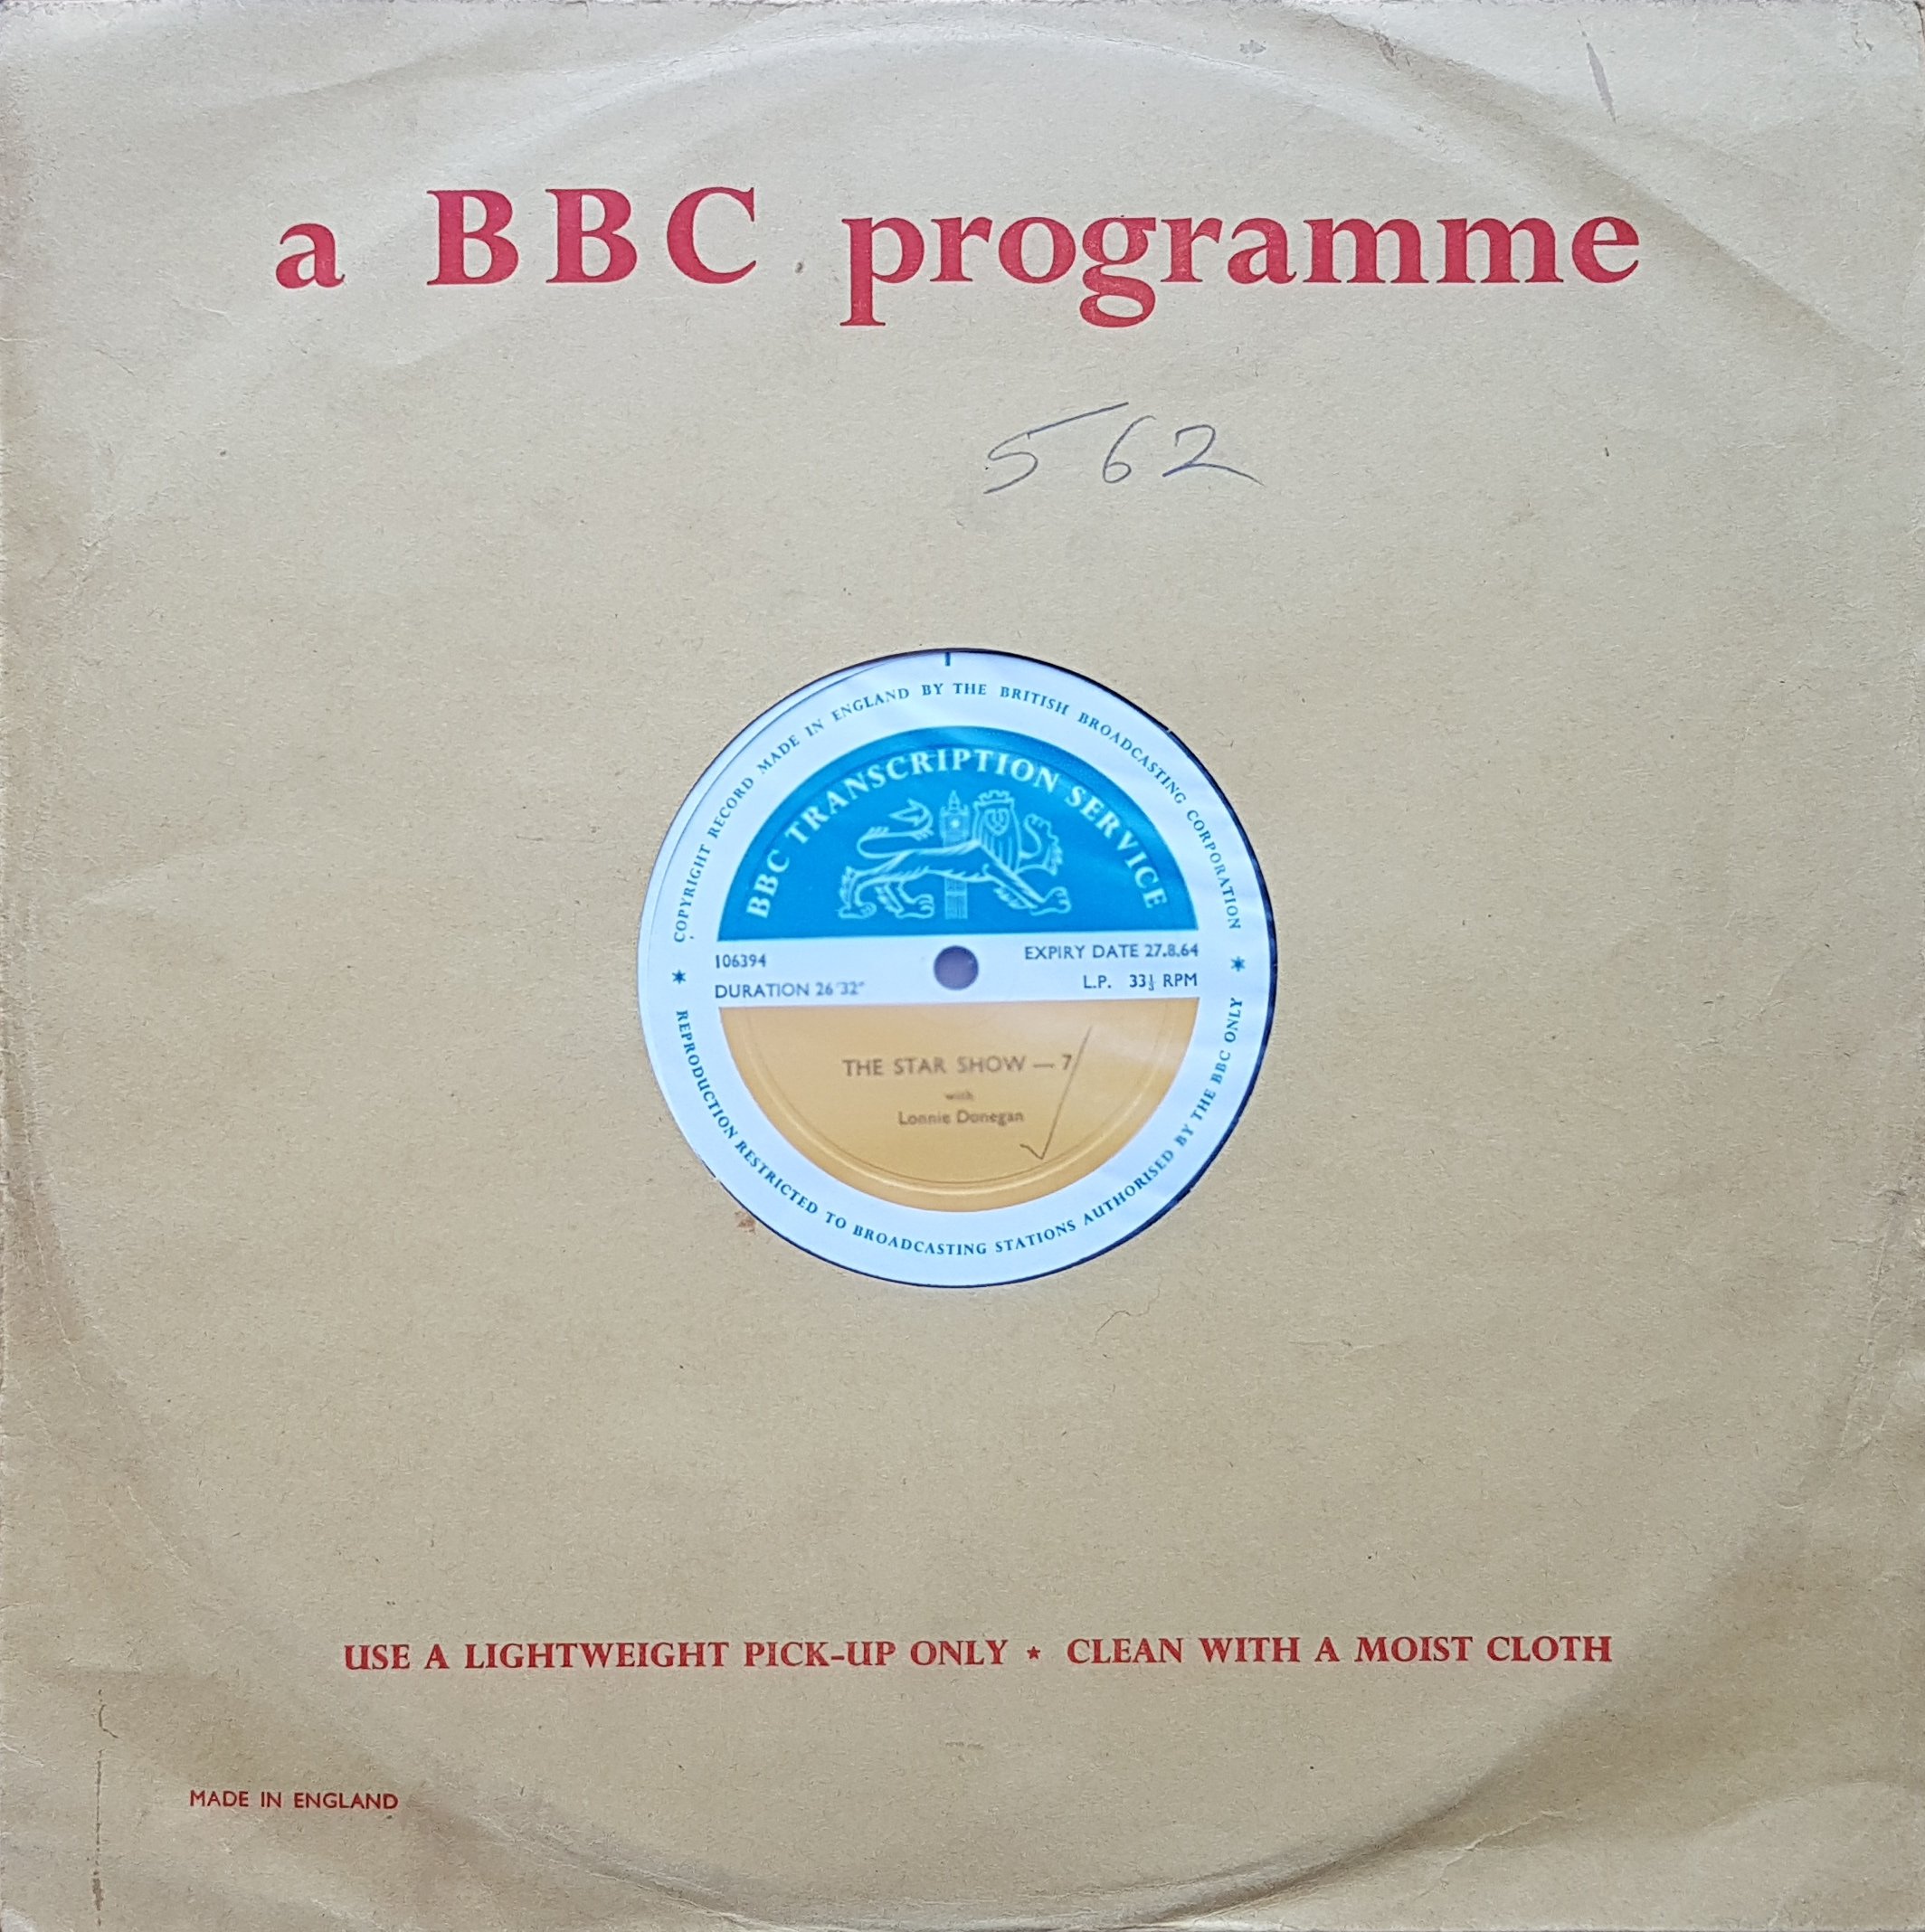 Picture of 106394 The star show - 7 & 8 by artist Lonnie Donegan from the BBC albums - Records and Tapes library